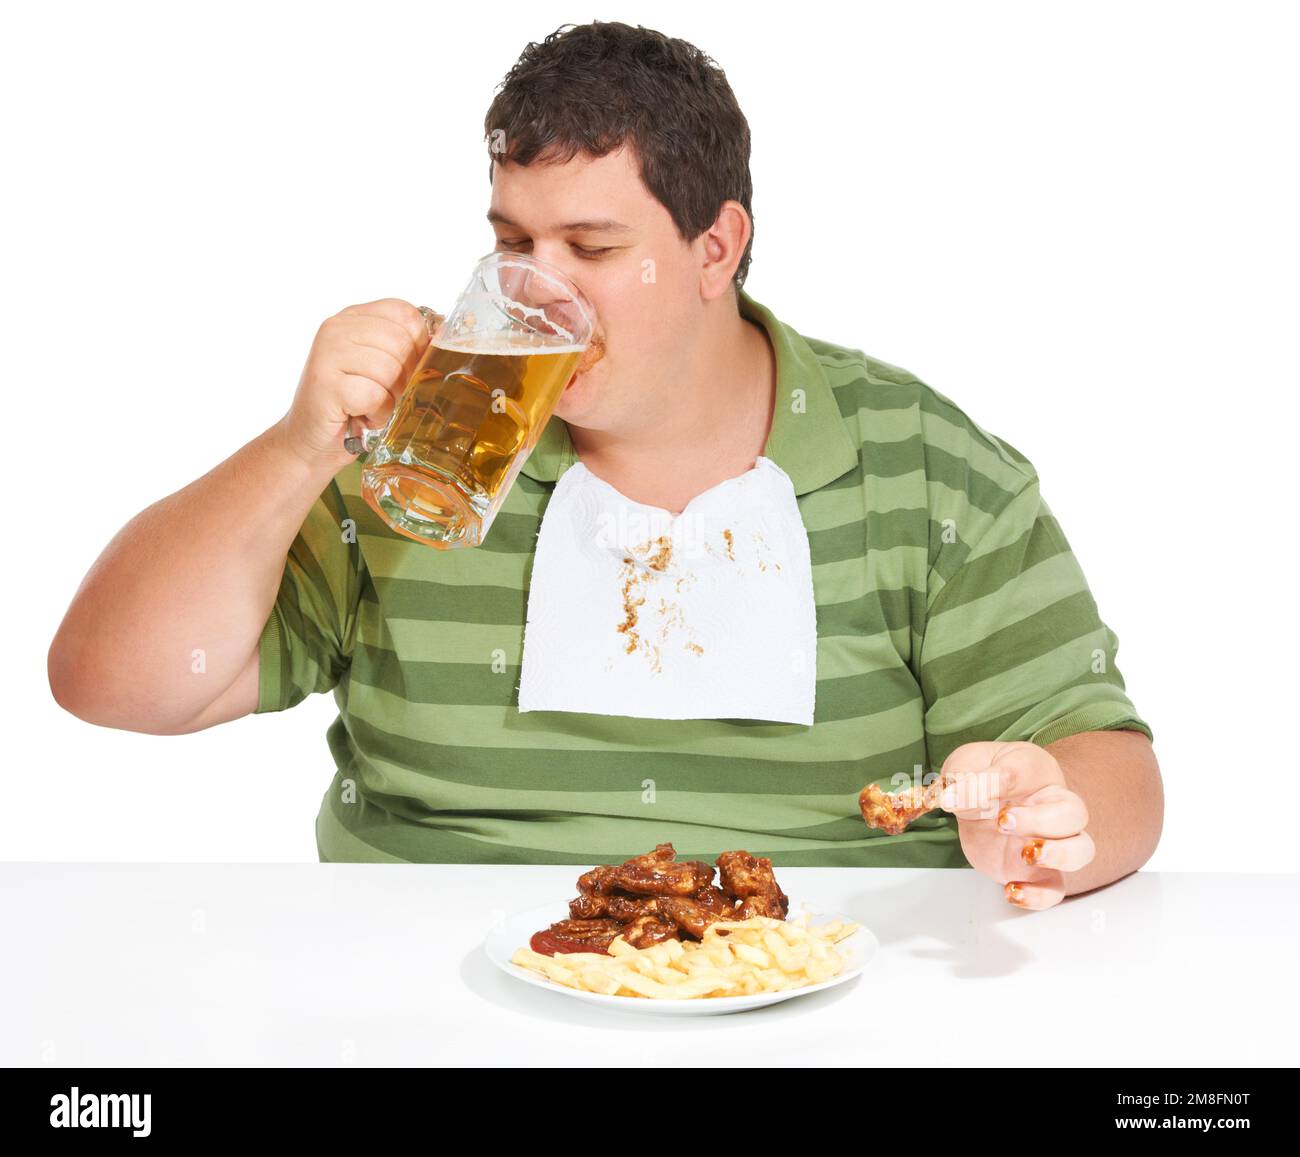 Feasting on fat. An obese young man wearing a bib and drinking a beer with a plate of chicken wings and fries in front of him. Stock Photo